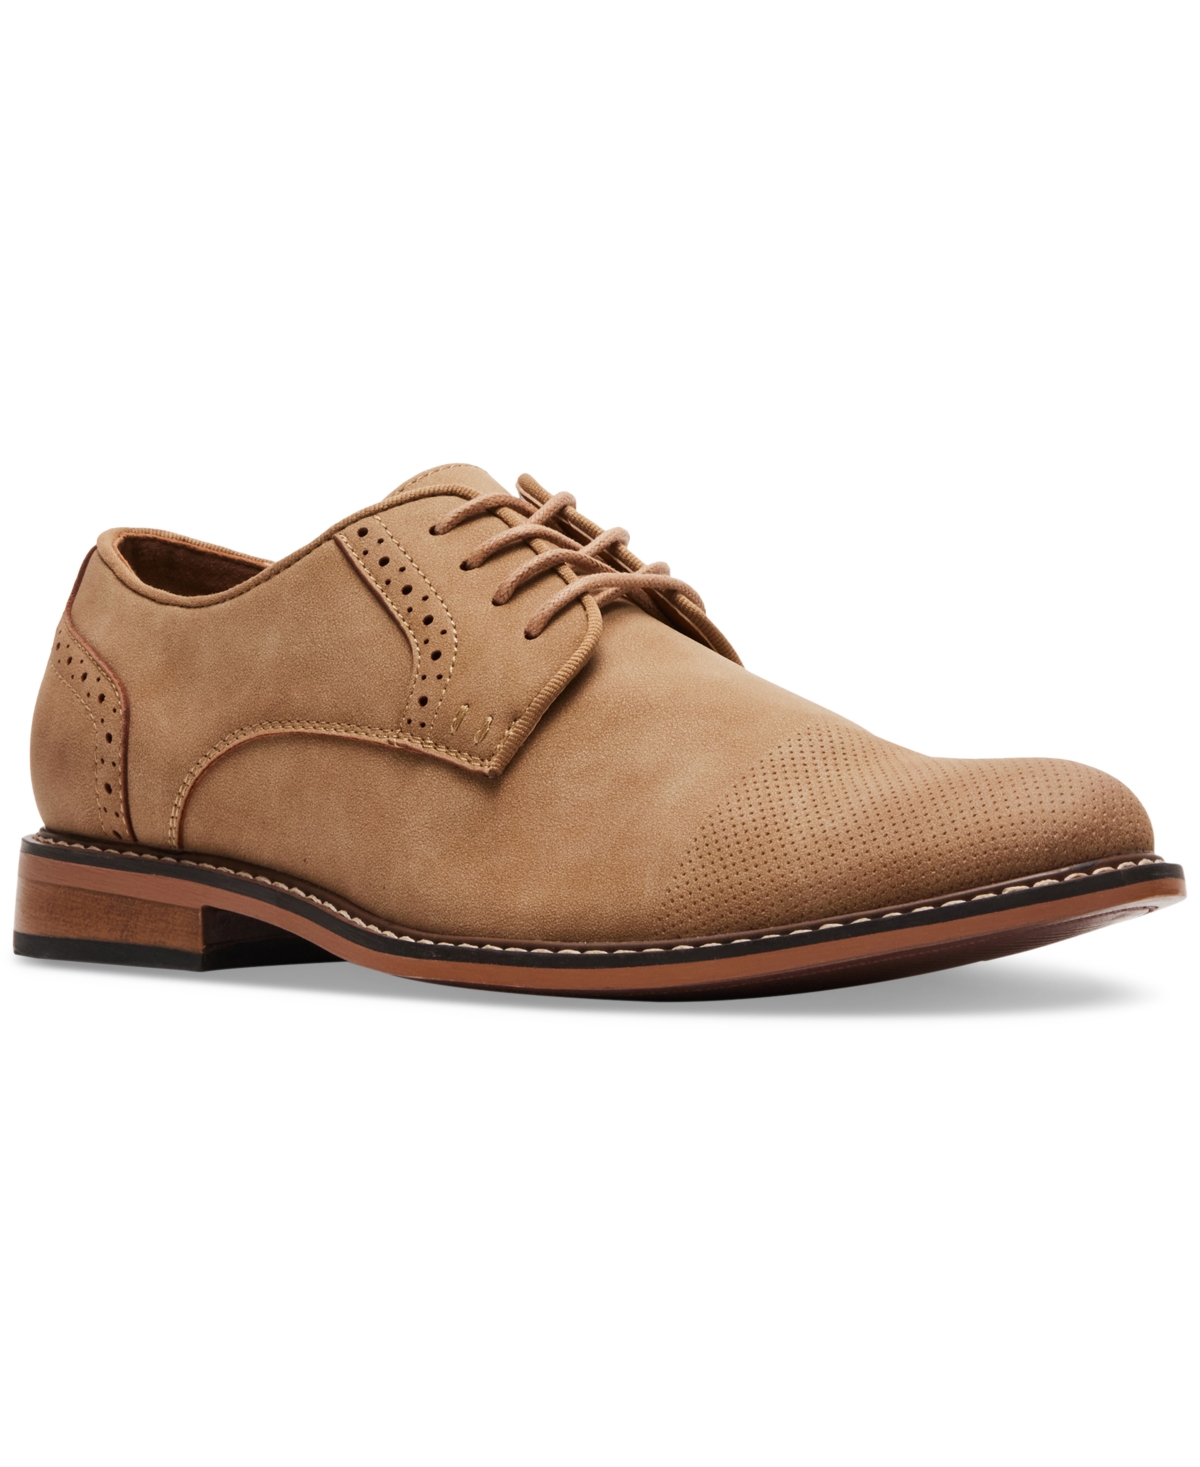 Men's Bobby Lace-Up Dress Shoes - Taupe